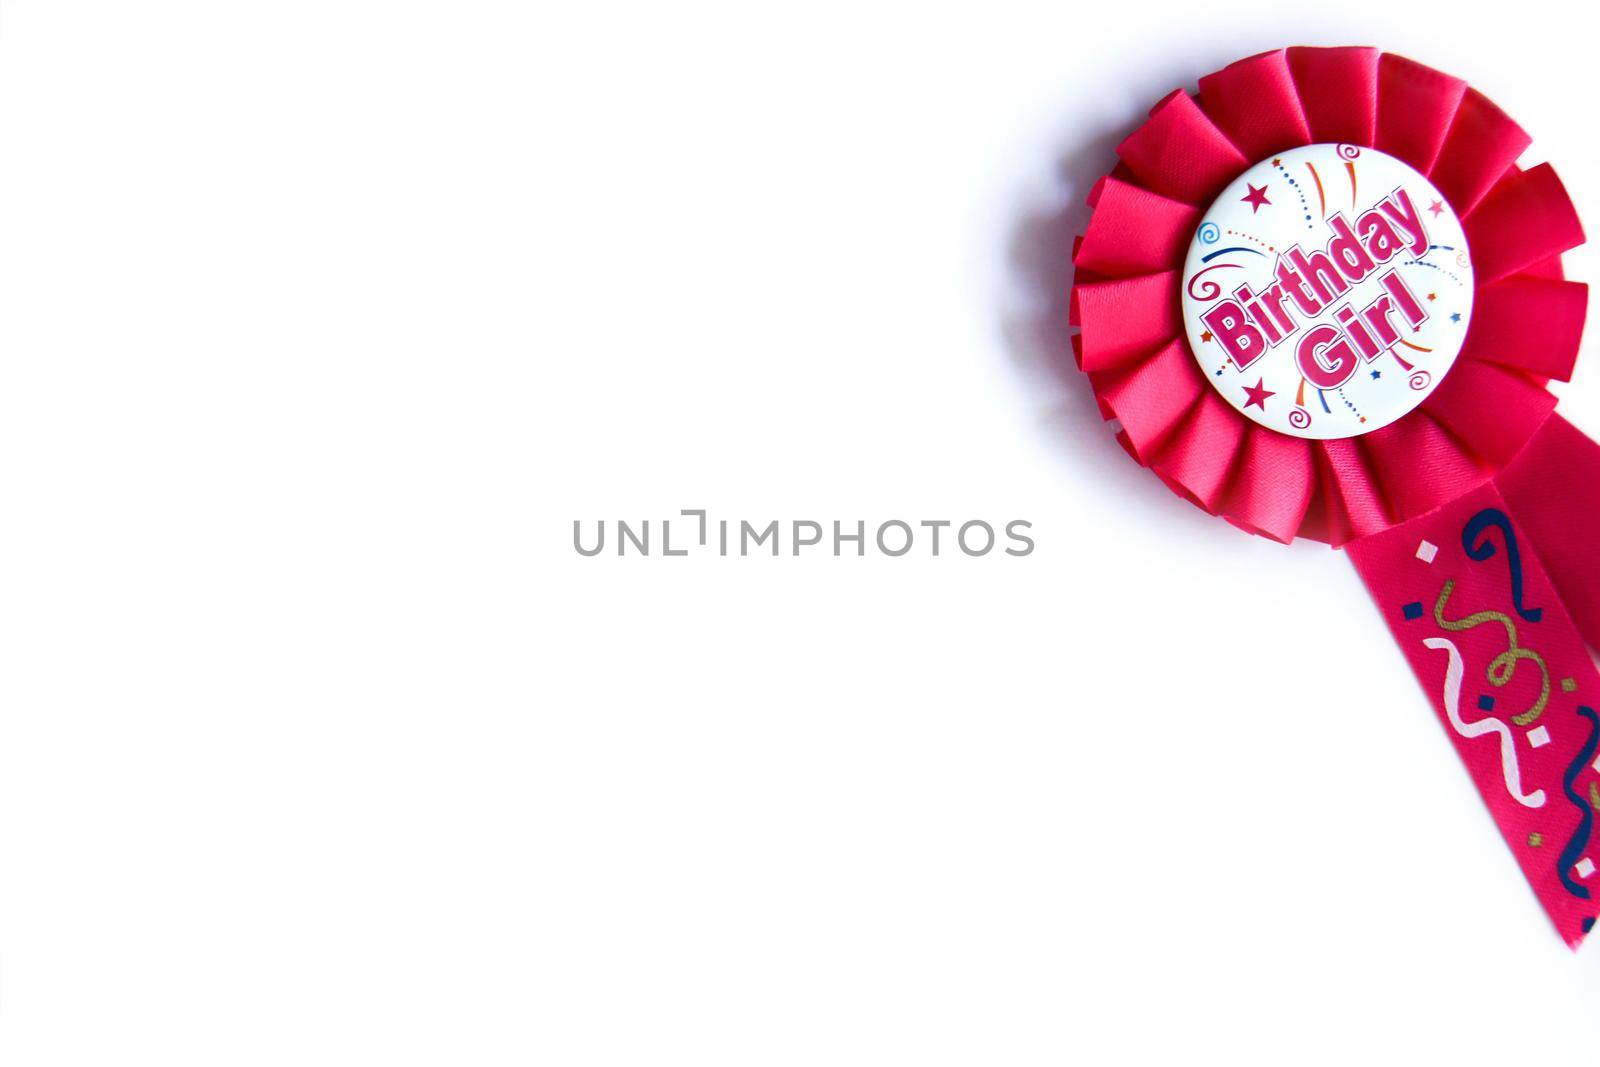 Happy birthday wishes for a girl on a pink badge on white background